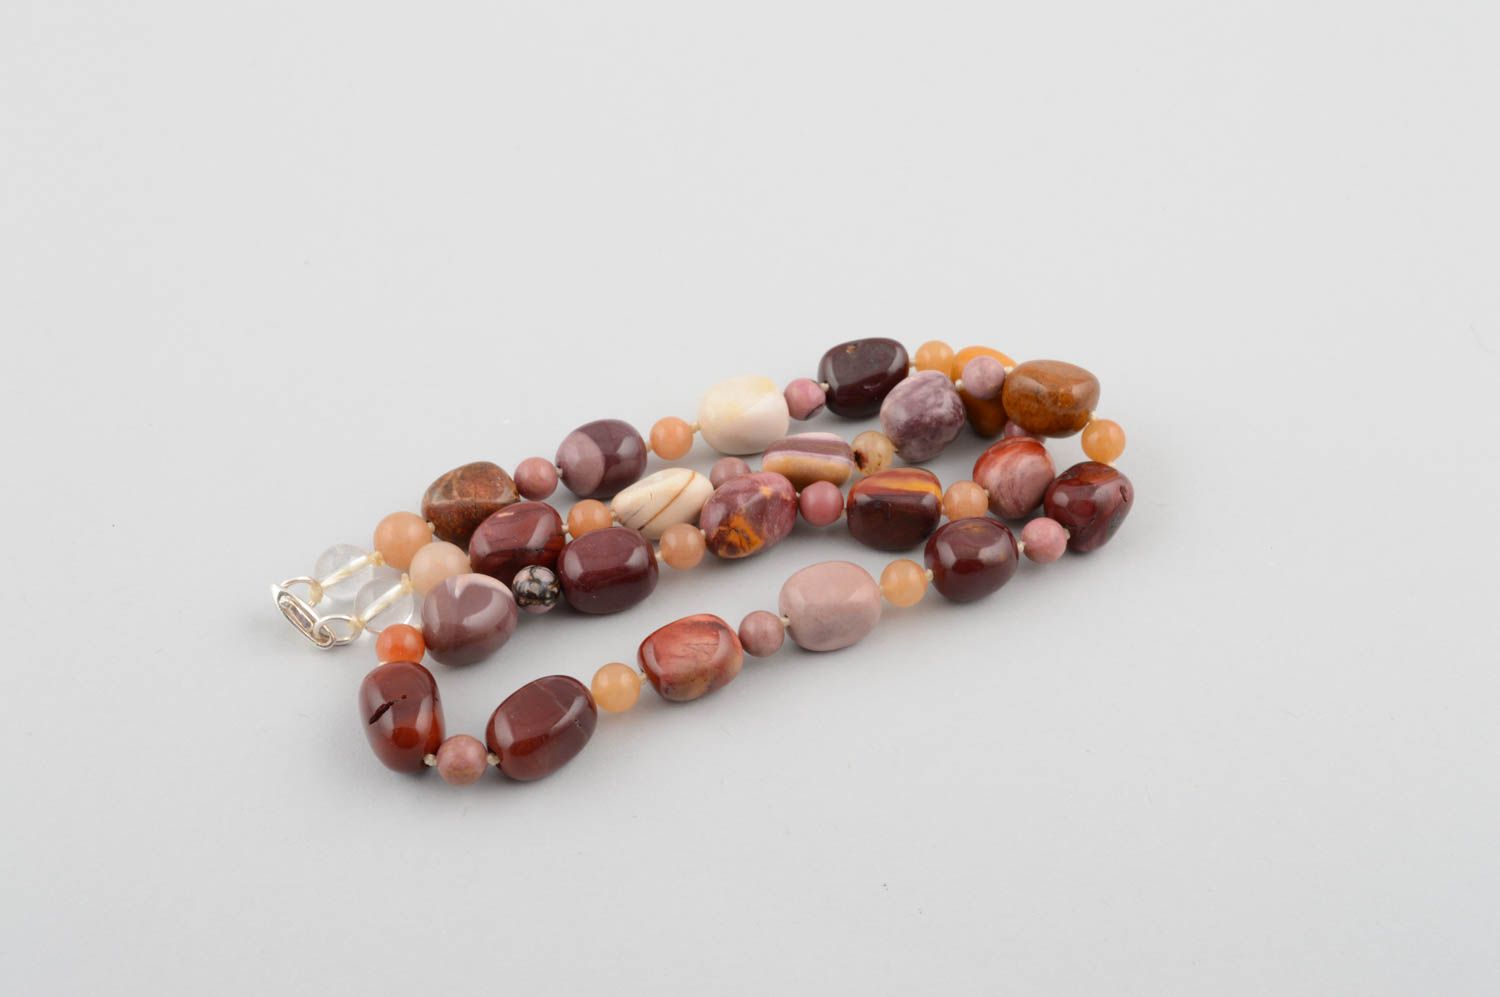 Handmade beads long beads with natural stones design jewelry women necklace  photo 4